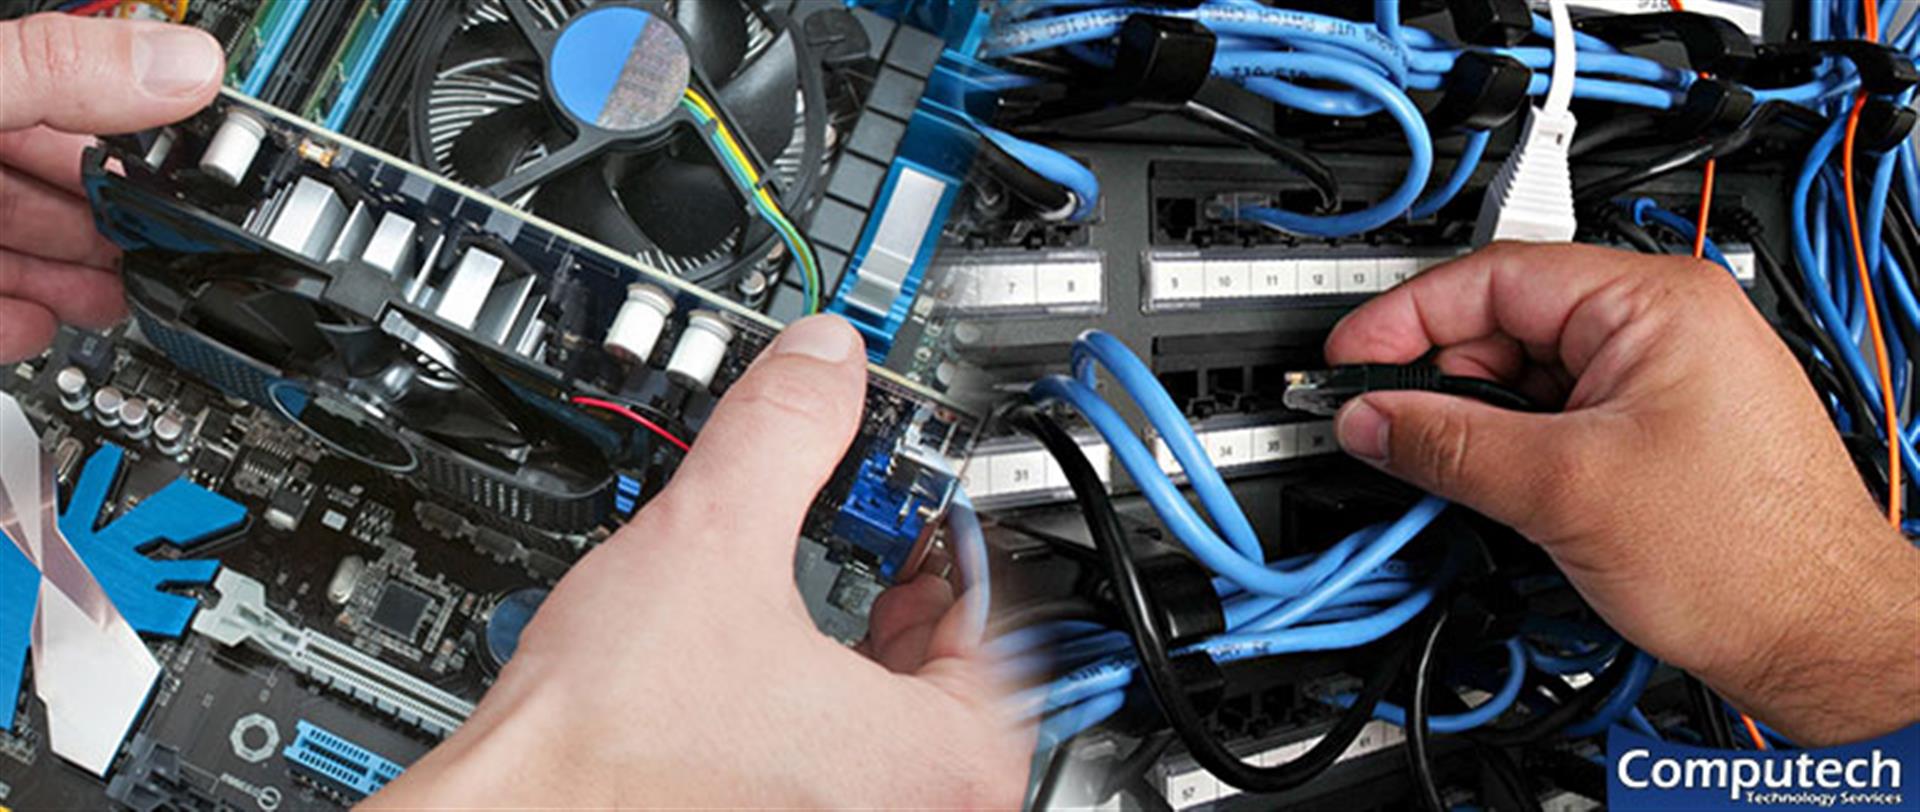 Jackson Tennessee Onsite PC & Printer Repair, Networks, Voice & Data Cabling Services